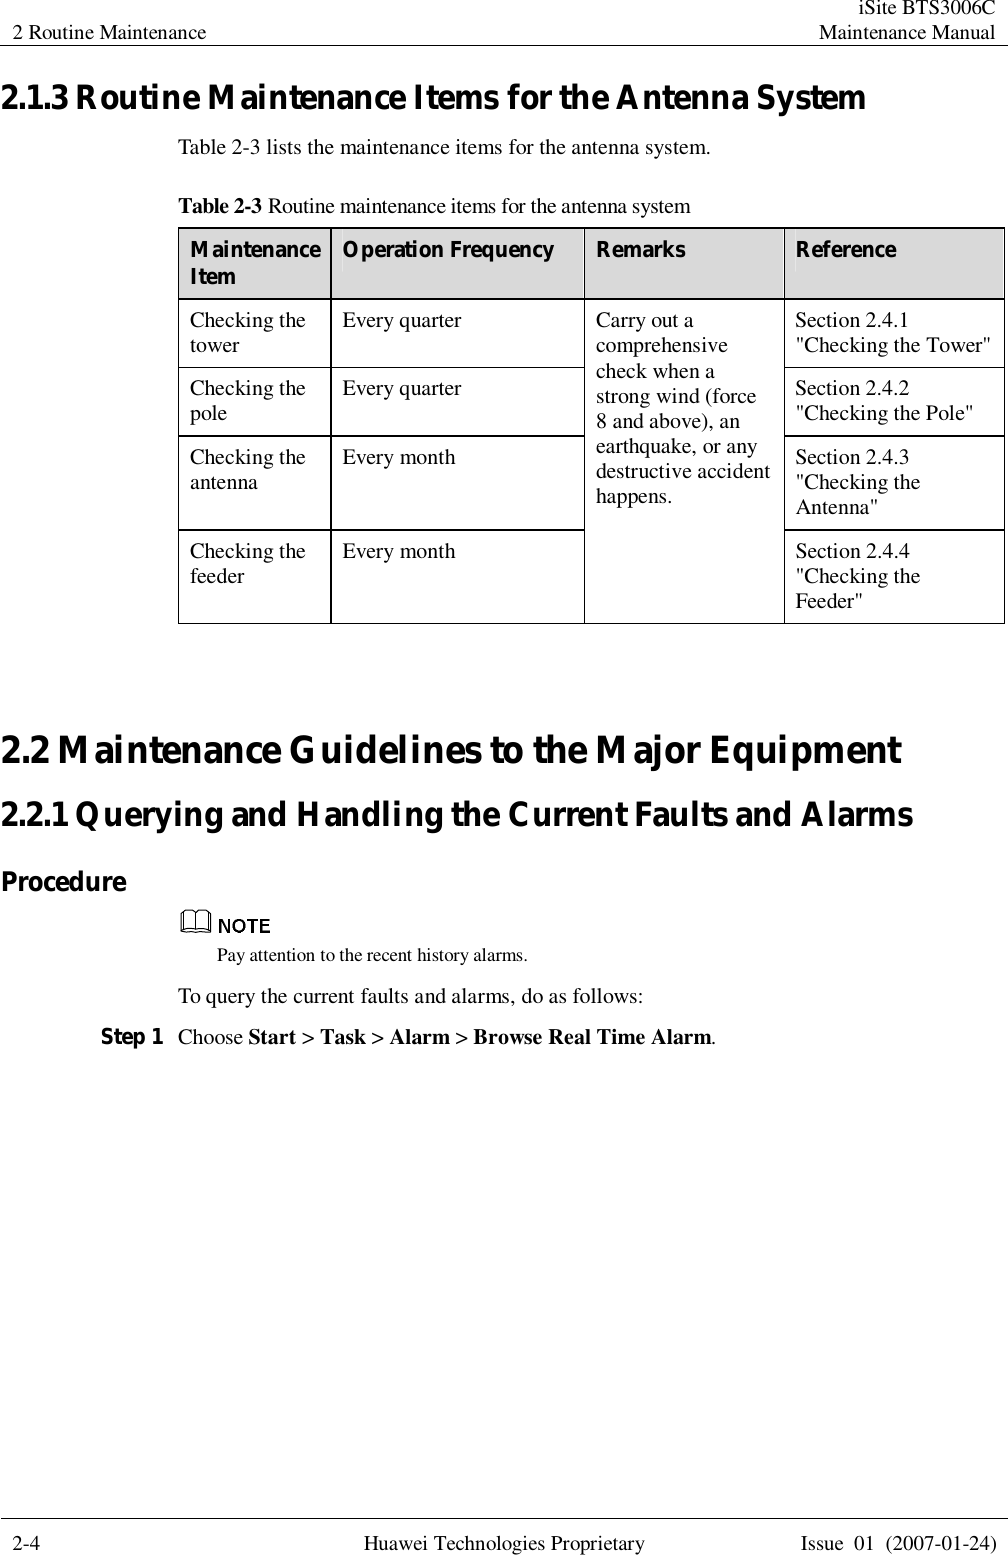 2 Routine Maintenance  iSite BTS3006C Maintenance Manual  2-4 Huawei Technologies Proprietary Issue 01 (2007-01-24)  2.1.3 Routine Maintenance Items for the Antenna System Table 2-3 lists the maintenance items for the antenna system. Table 2-3 Routine maintenance items for the antenna system Maintenance Item  Operation Frequency  Remarks  Reference Checking the tower  Every quarter Section 2.4.1 &quot;Checking the Tower&quot; Checking the pole  Every quarter Section 2.4.2 &quot;Checking the Pole&quot; Checking the antenna  Every month Section 2.4.3 &quot;Checking the Antenna&quot; Checking the feeder  Every month Carry out a comprehensive check when a strong wind (force 8 and above), an earthquake, or any destructive accident happens. Section 2.4.4 &quot;Checking the Feeder&quot;  2.2 Maintenance Guidelines to the Major Equipment 2.2.1 Querying and Handling the Current Faults and Alarms Procedure  Pay attention to the recent history alarms. To query the current faults and alarms, do as follows: Step 1 Choose Start &gt; Task &gt; Alarm &gt; Browse Real Time Alarm. 